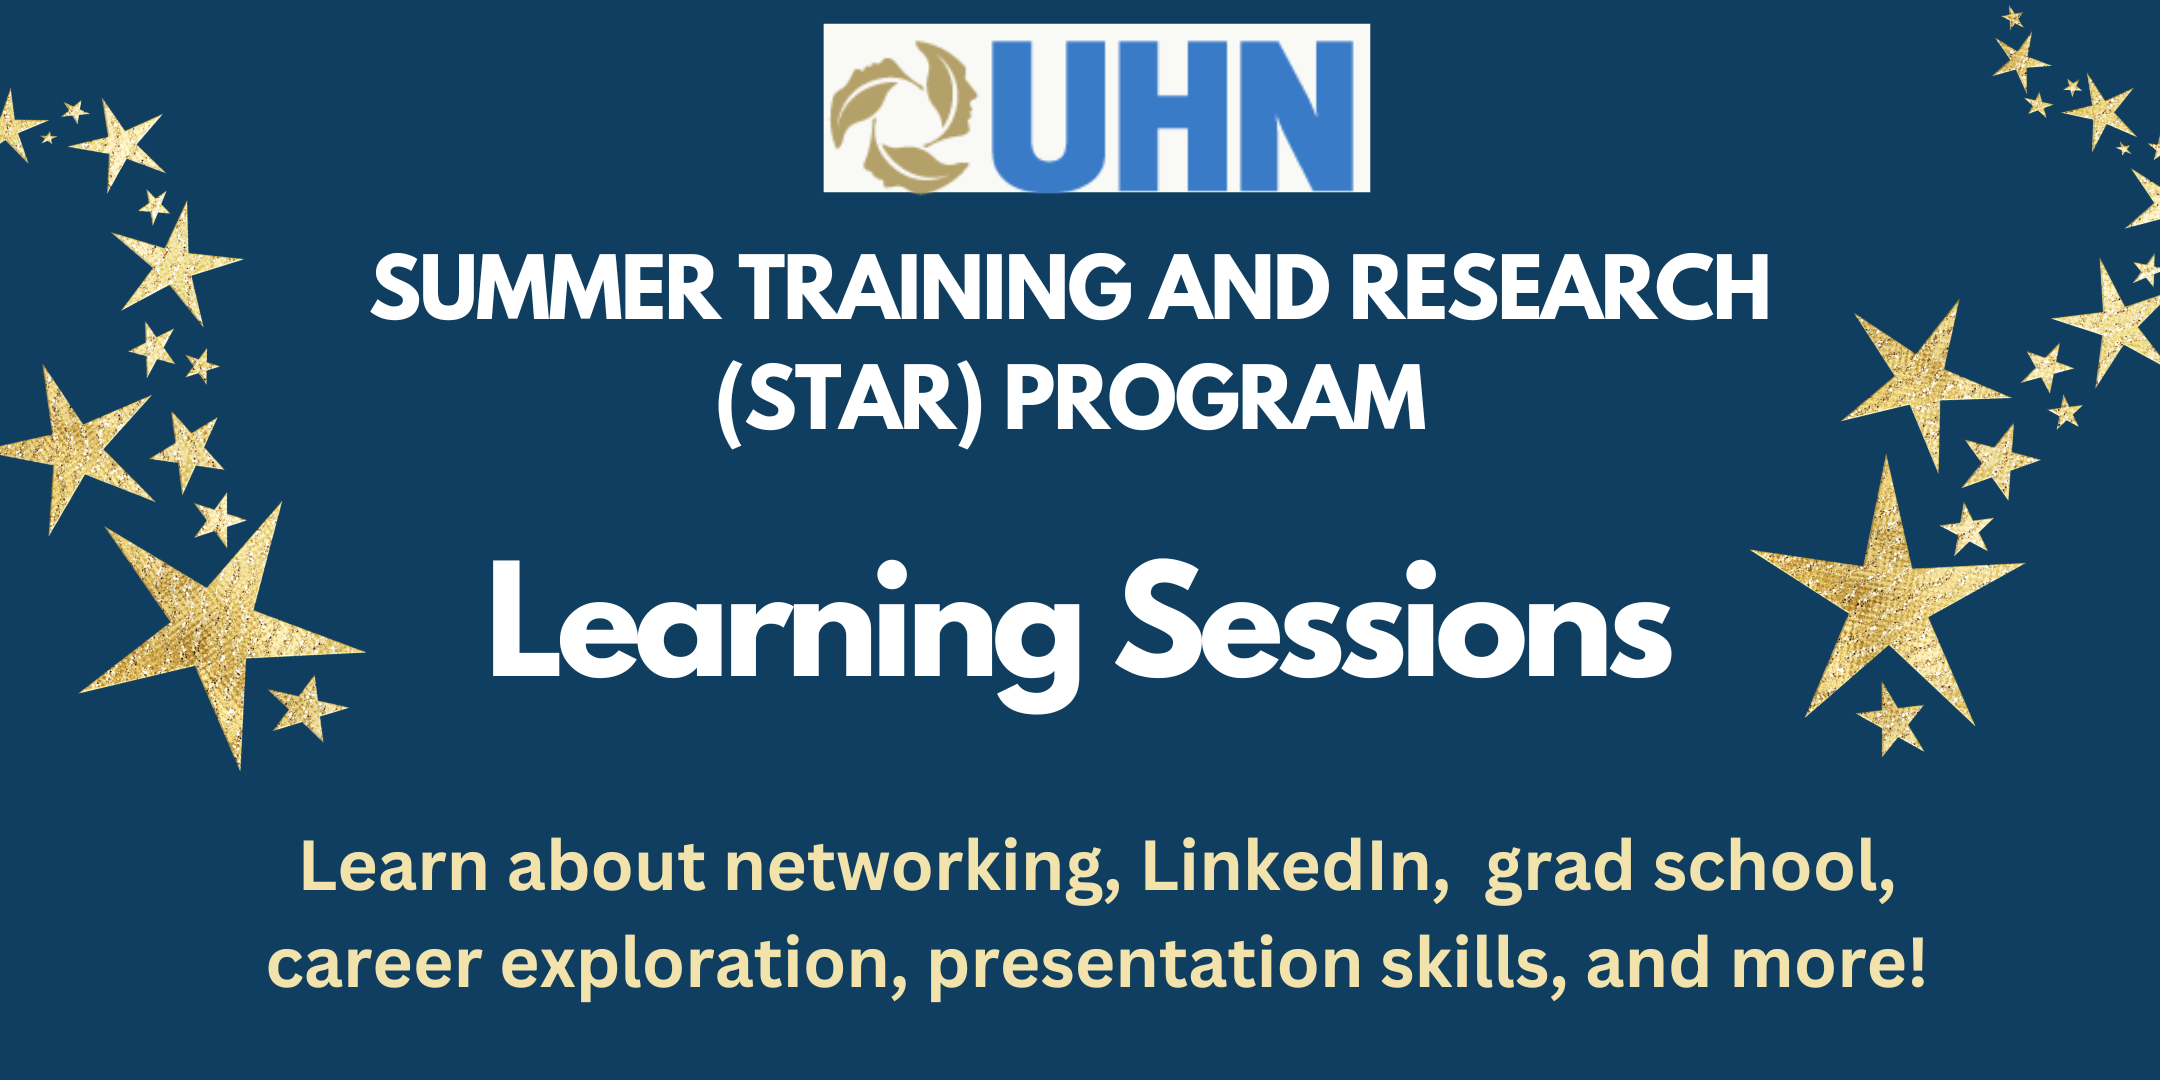 Summer Training and Research (STAR) Program Learning Sessions. Learn about networking, LinkedIn, grad school, career exploration, presentation skills and more!